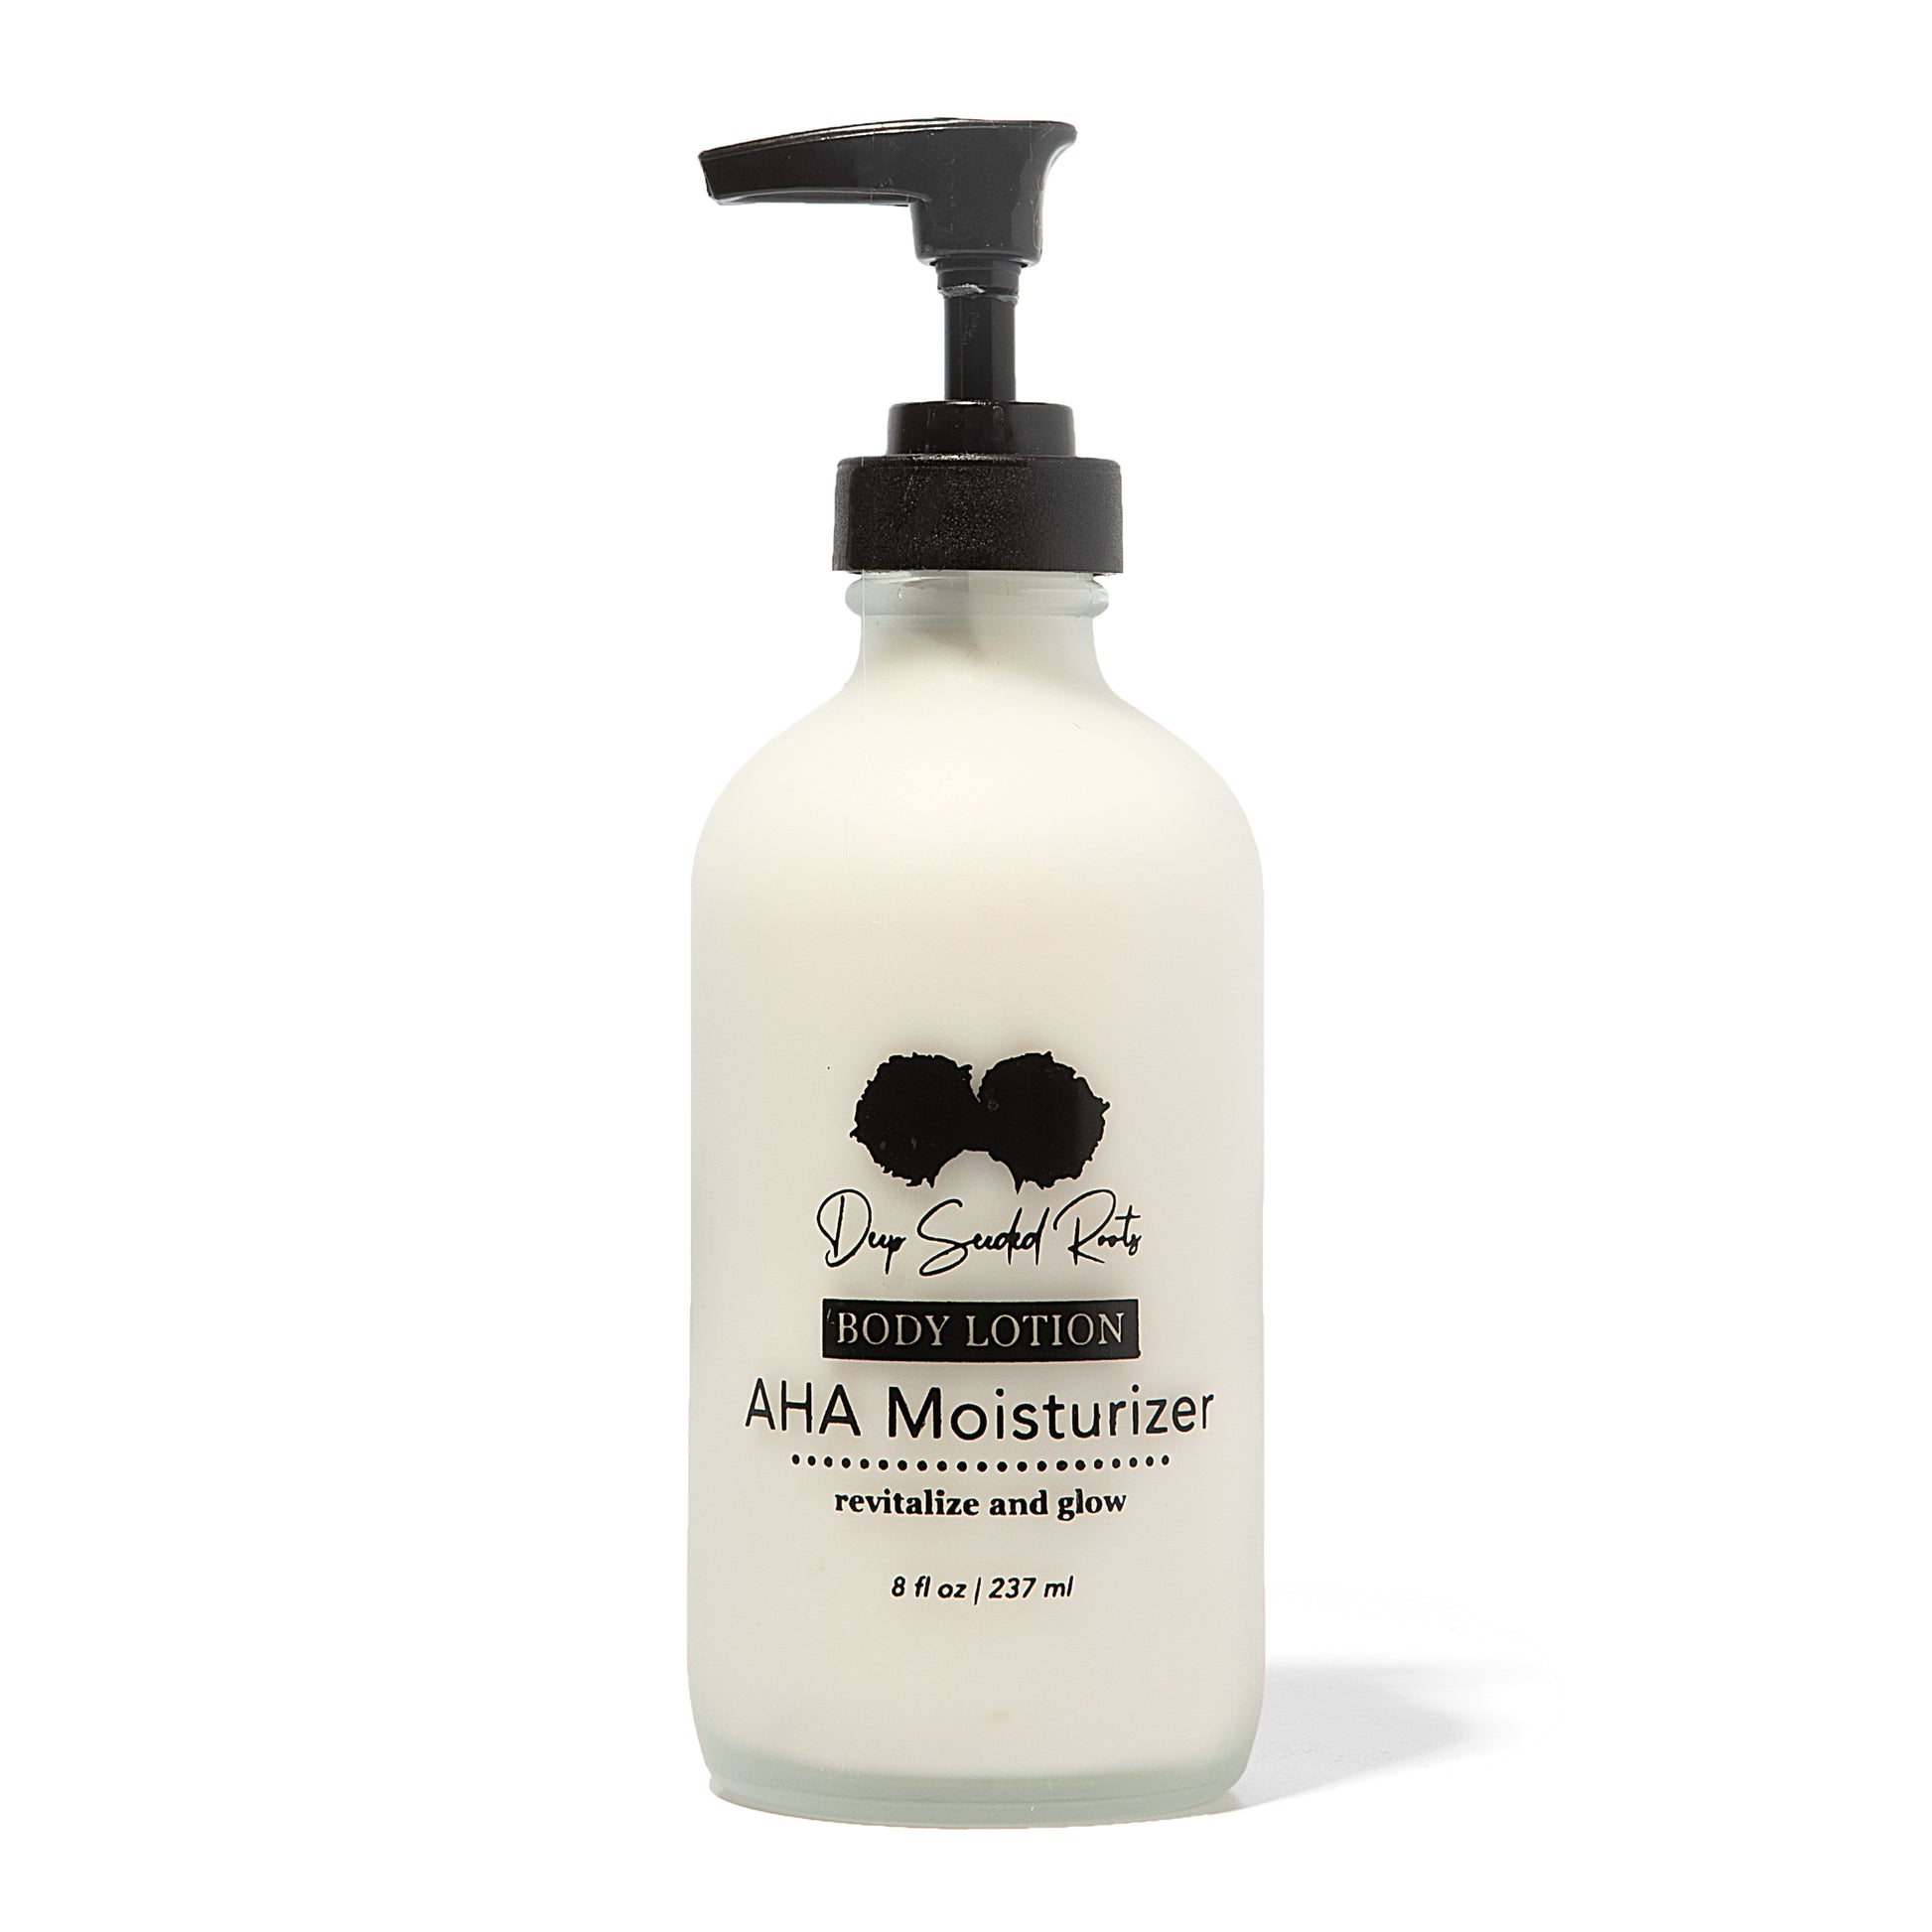 Deep Seeded Roots AHA Moisturizer in pump bottle on white background